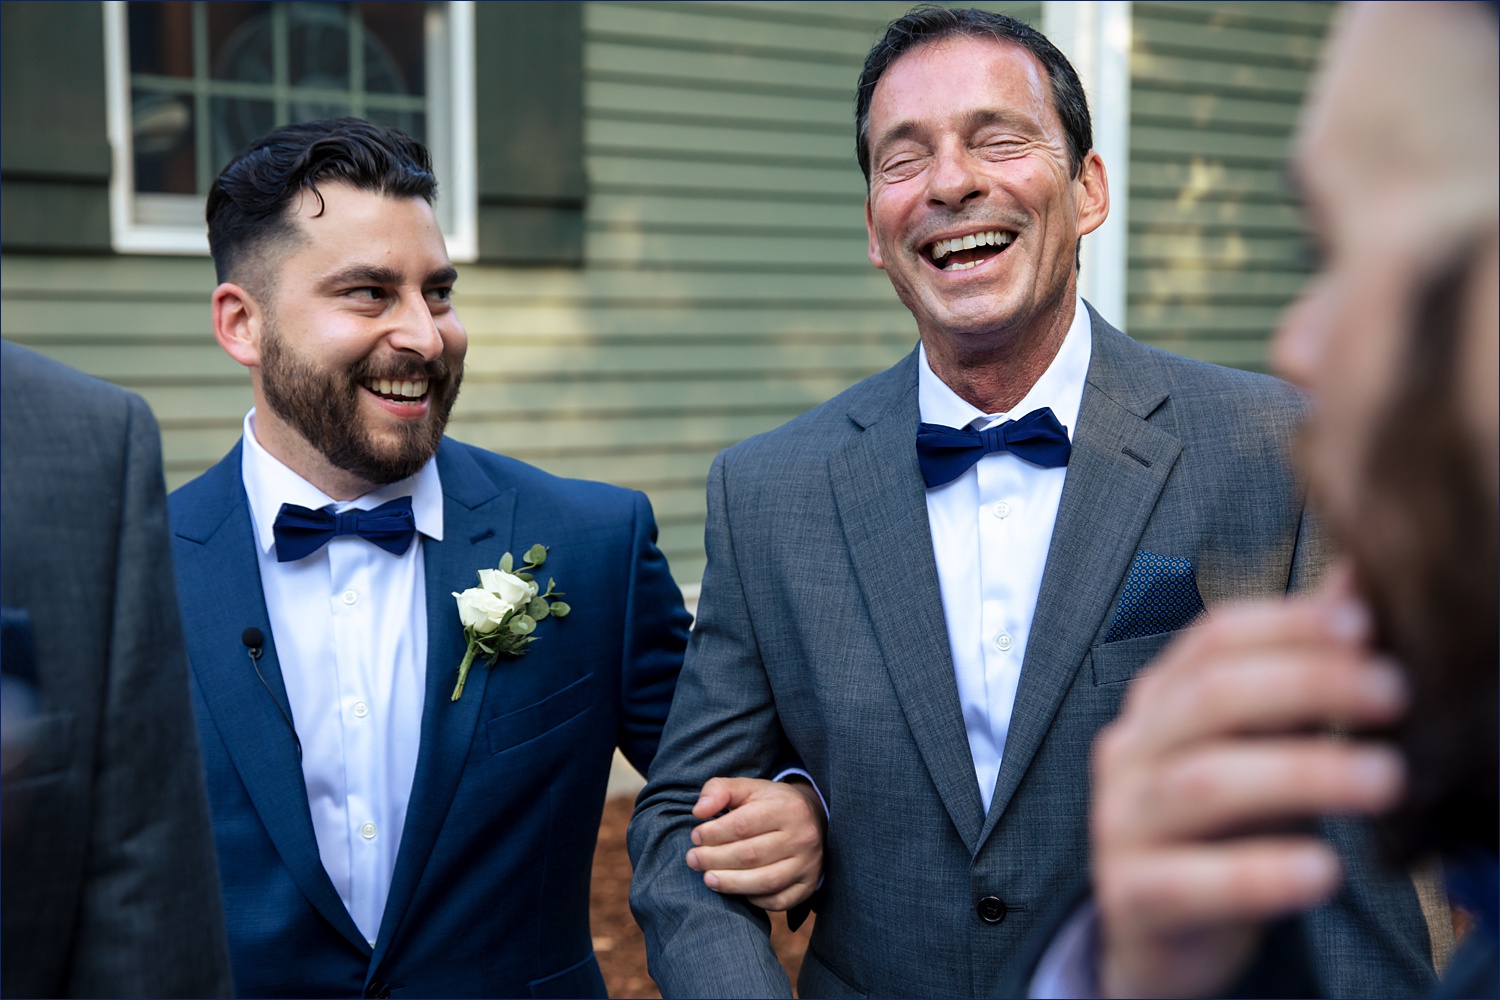 The groom and his father share a laugh